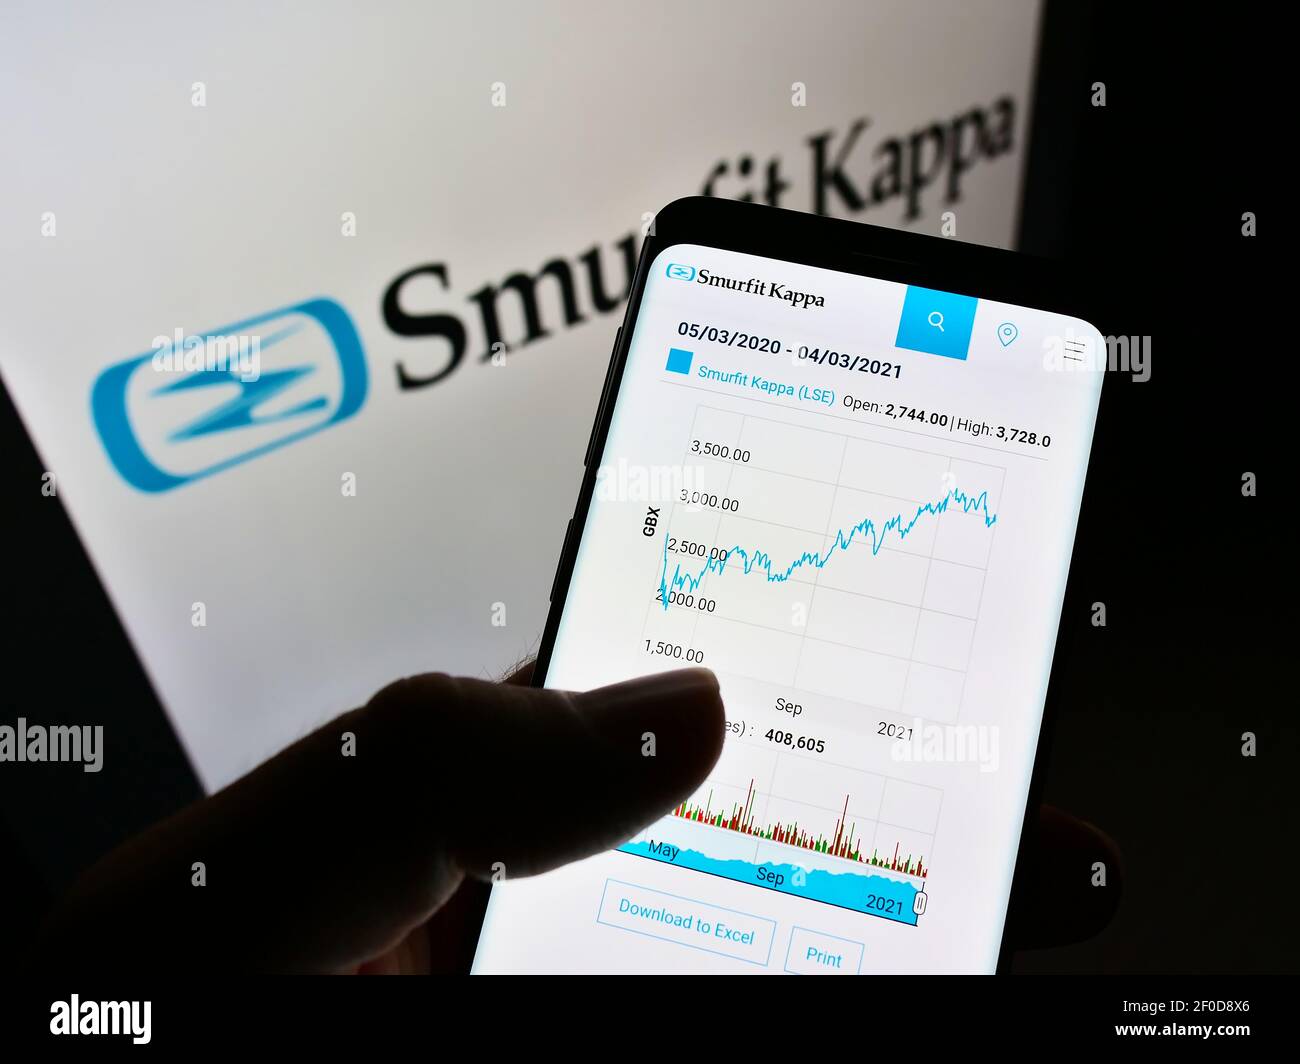 Person holding smartphone with website and chart of packaging company Smurfit Kappa Group plc on screen with logo. Focus on center of phone display. Stock Photo